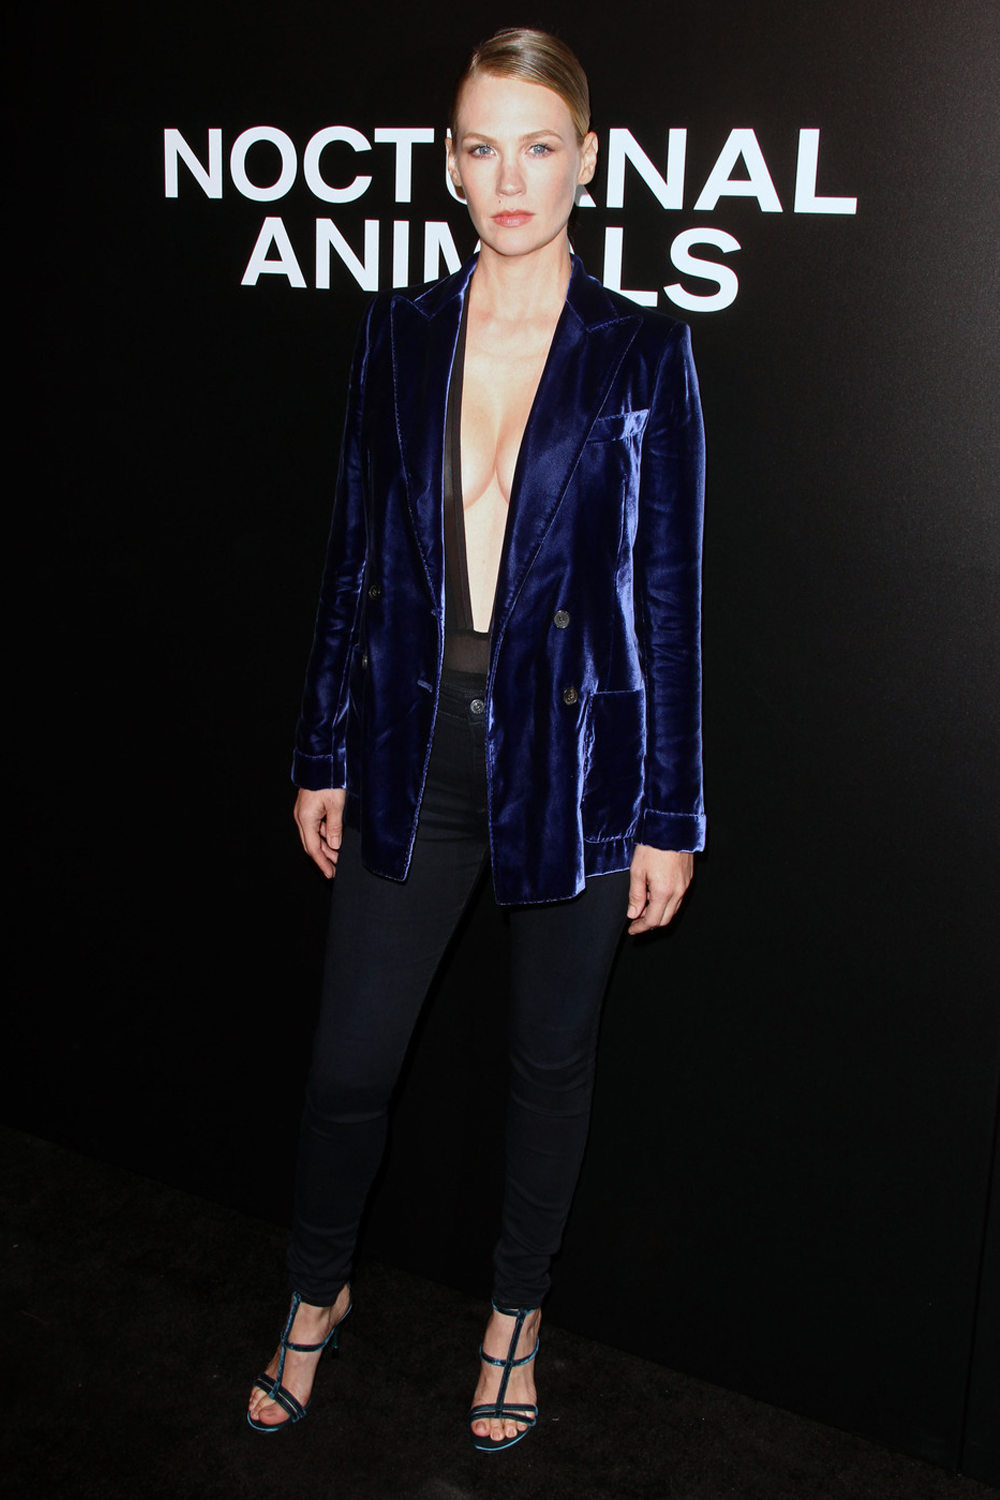 january-jones-nocturnal-animals-special-screening-red-carpet-fashion-tom-ford-tom-lorenzo-site-1